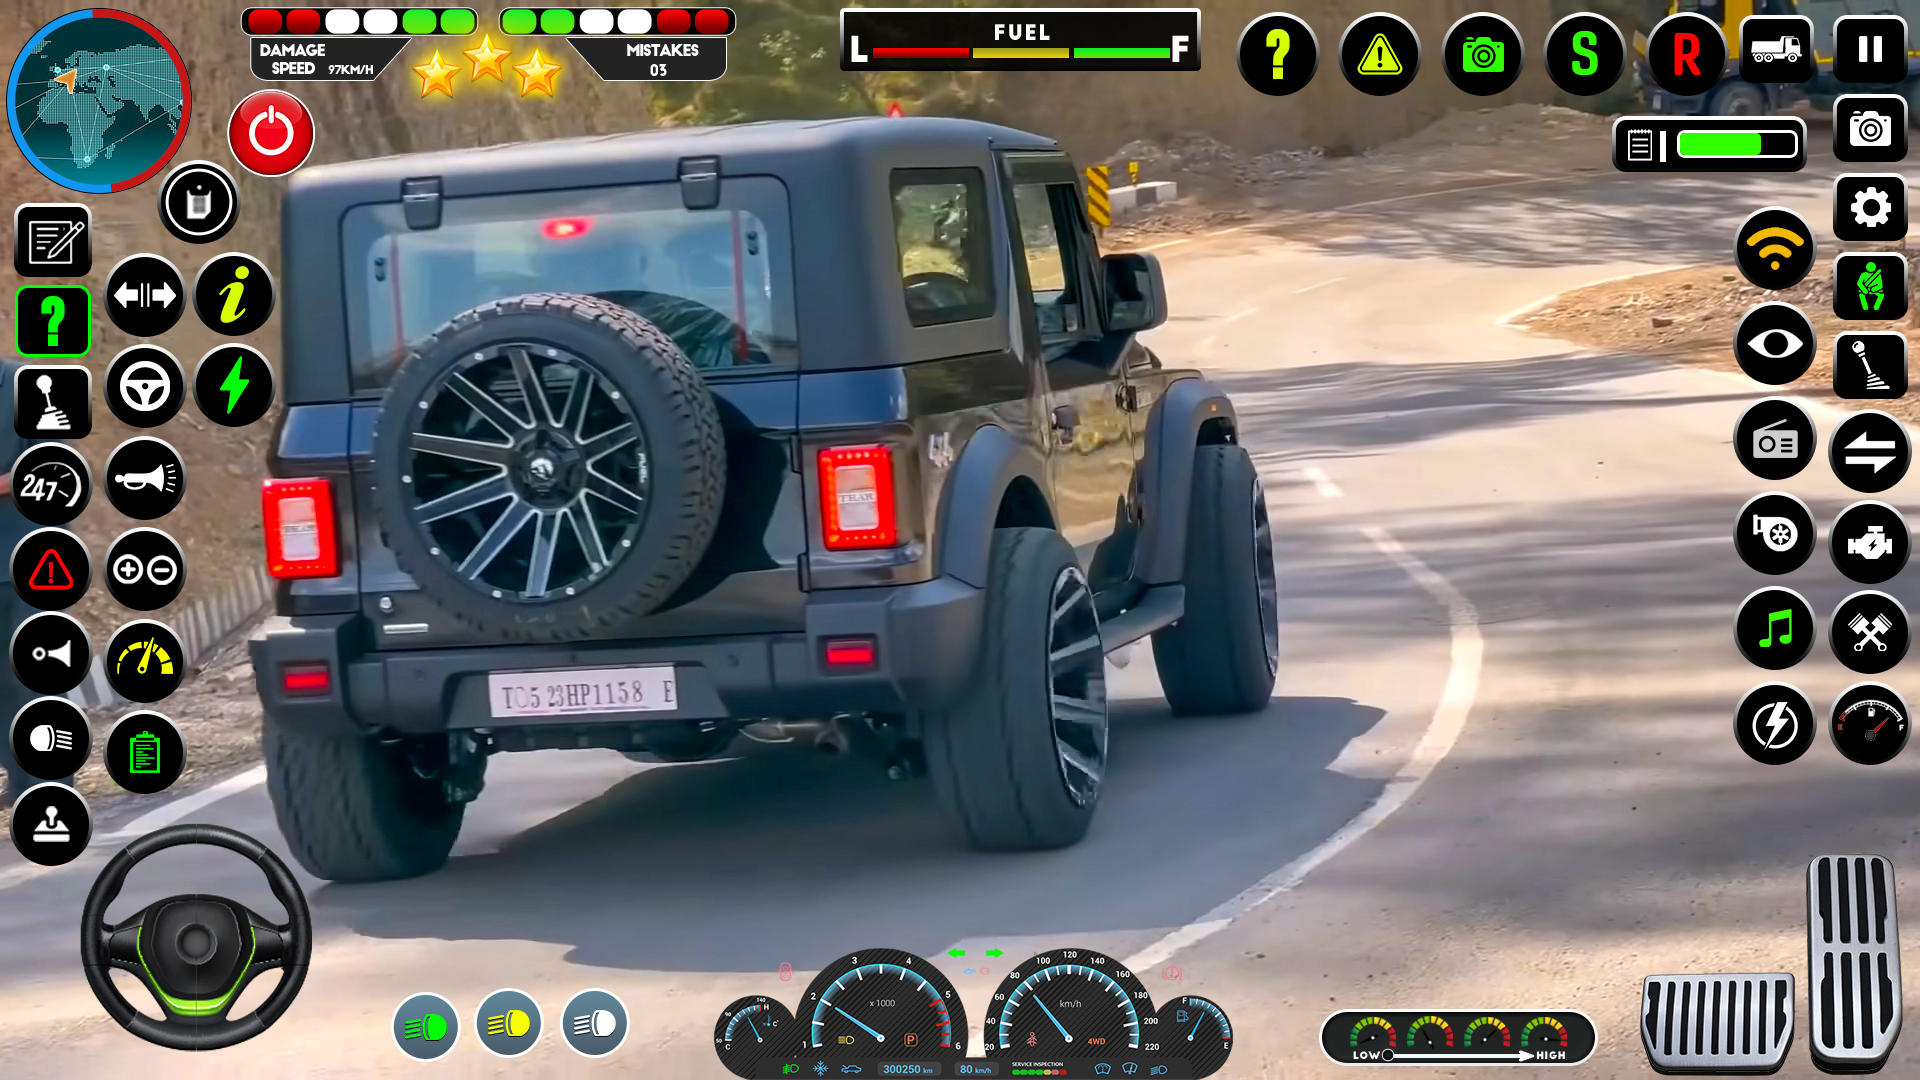 Screenshot 1 of Offroad Jeep Driving:Jeep Game 1.0